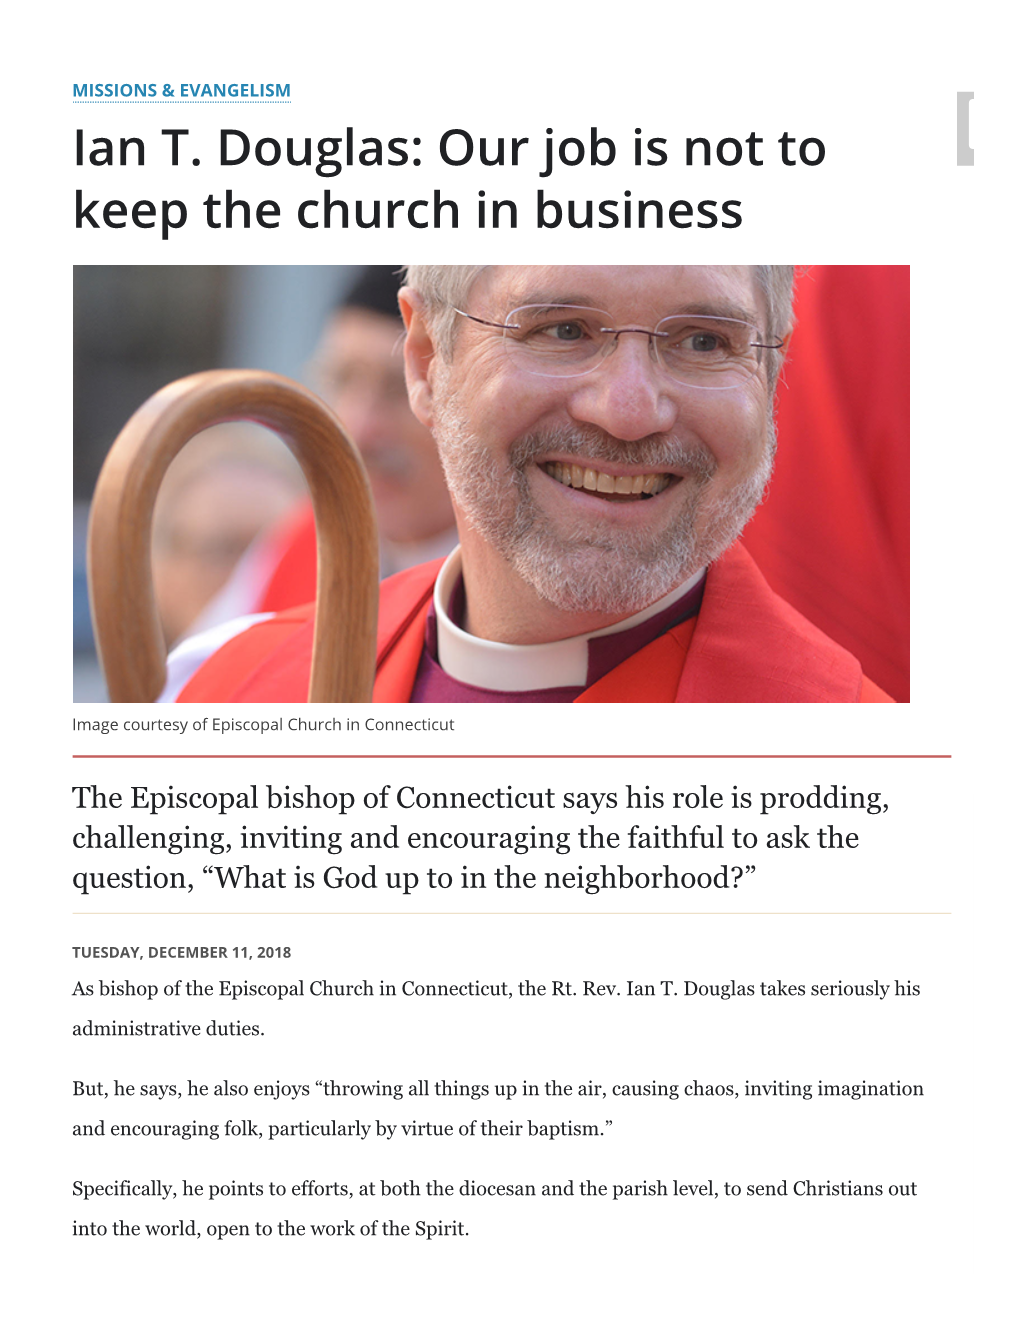 Ian T. Douglas: Our Job Is Not to Keep the Church in Business